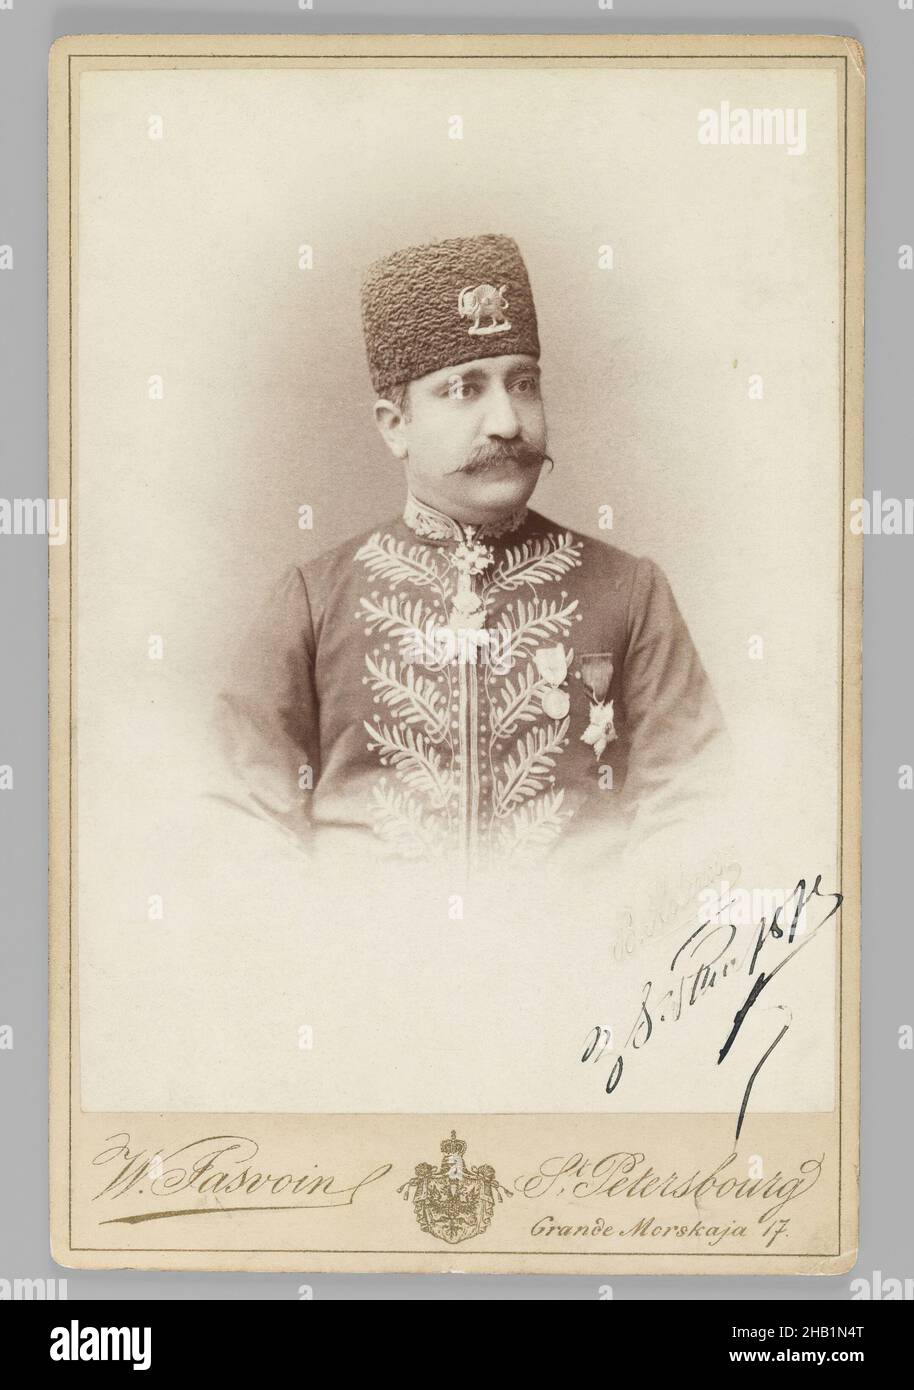 One of 274 Vintage Photographs, Gelatin silver printing out paper, 1875, Qajar, Qajar Period, Photo: 5 1/2 x 4 in., 13.9 x 10.1 cm;, cartes de visite, military, moustache, photograph, photography, Qajar, Russia, St. Petersburg Stock Photo